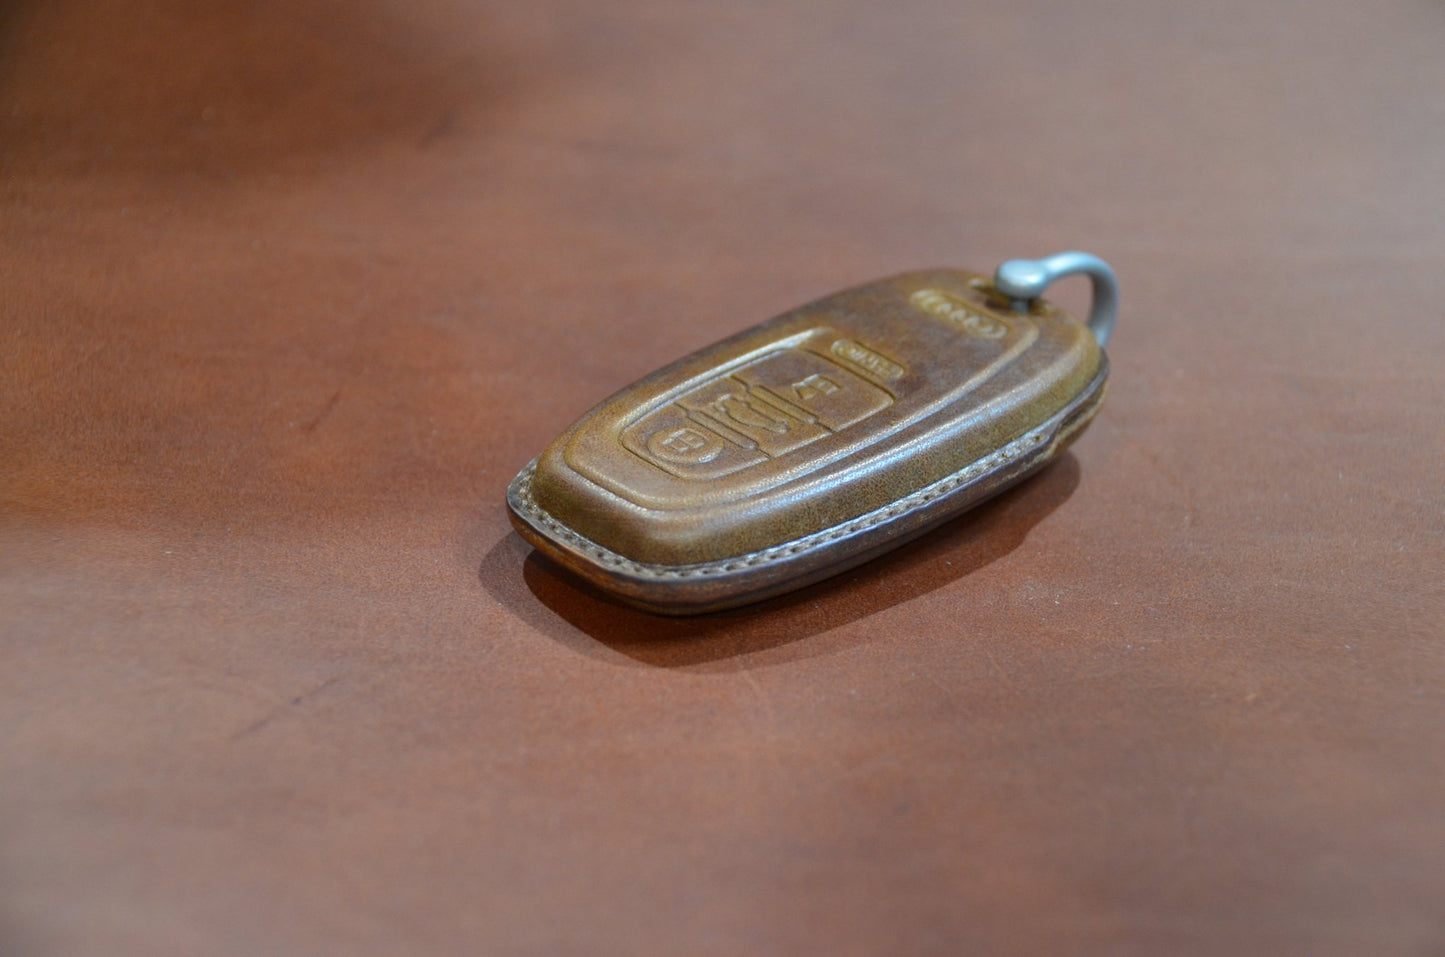 Leather Key Fob Cover for AUDI - NATS GOODS CO.